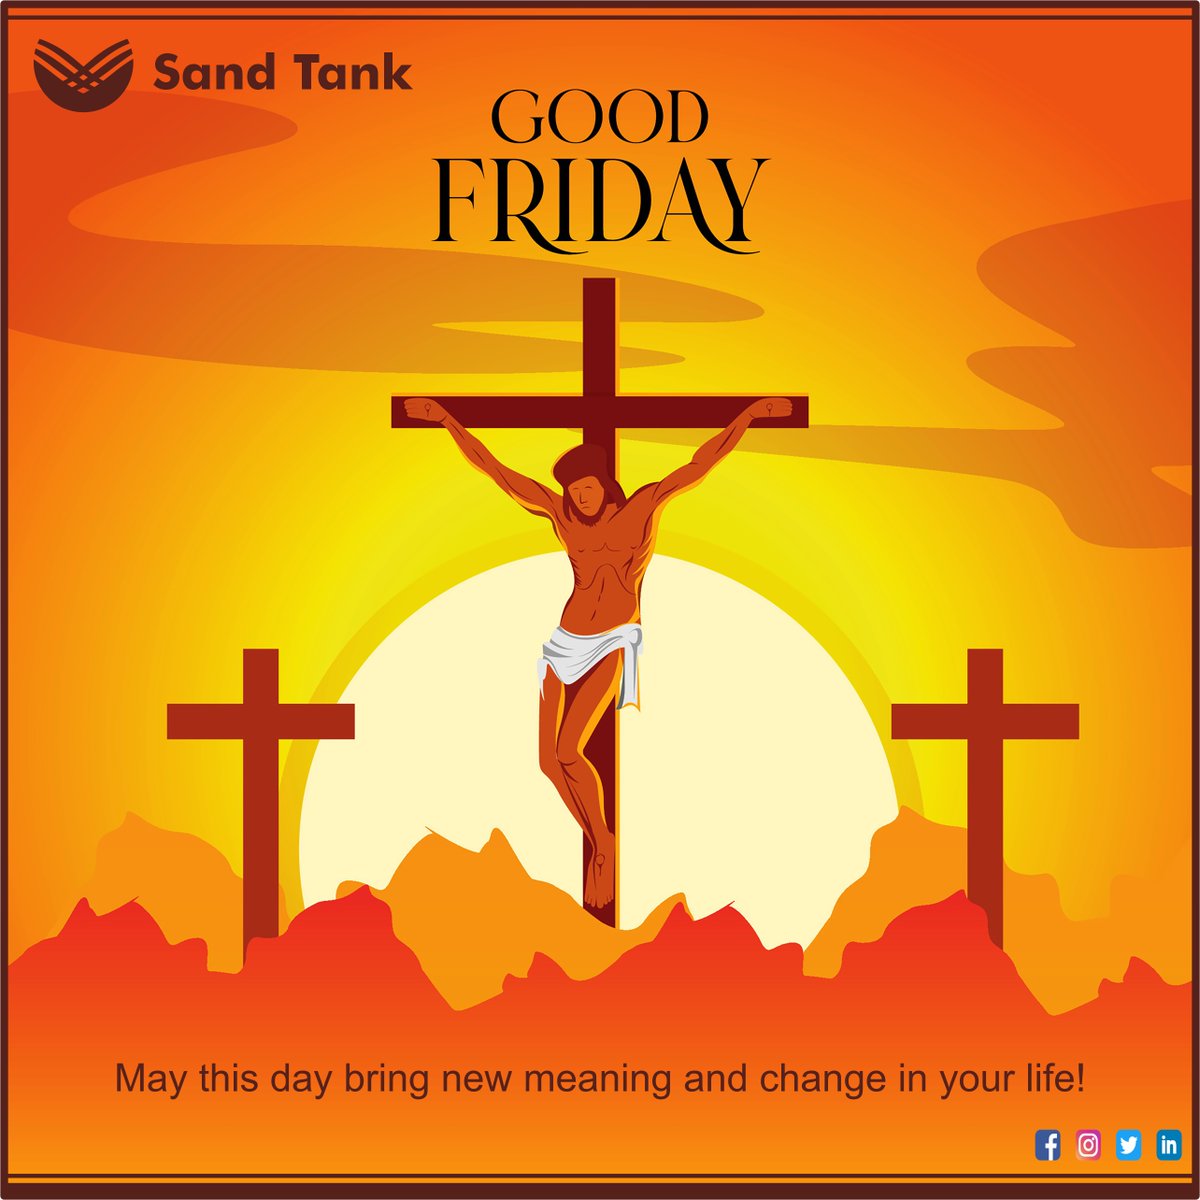 On this day of solemn remembrance, let's bow our heads in reverence for the sacrifice of Jesus Christ. May His unwavering love and compassion continue to inspire and uplift us. 🌿✝ 

#Sandtankfoundation #GoodFriday #ChristianTradition #ChristianCommunity #Happygoodfriday